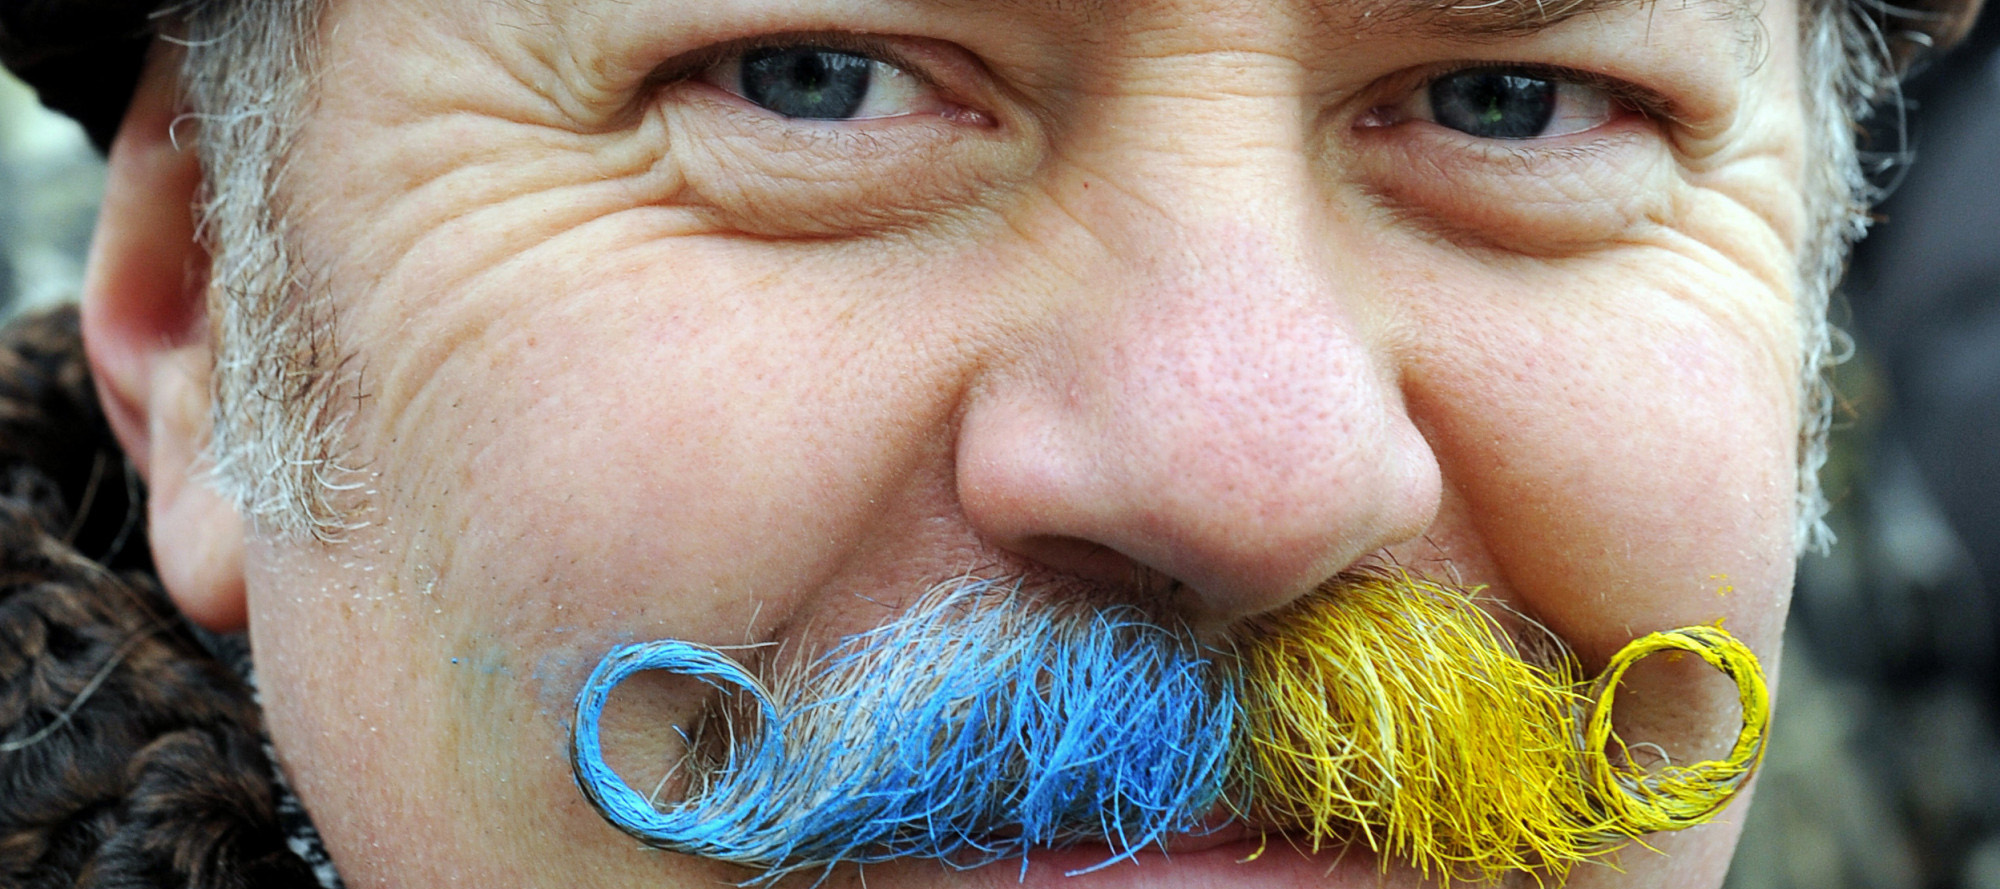 A man with a mustache painted in the colors of the Ukrainian flag poses for a photograph in Independence Square in Kiev during a mass opposition rally on December 15, 2013. At least 200,000 pro-European demonstrators began a mass rally in the Ukrainian capital today in a fresh show of force against President Viktor Yanukovych after his failure to sign a key EU agreement. AFP PHOTO / YURIY DYACHYSHYN